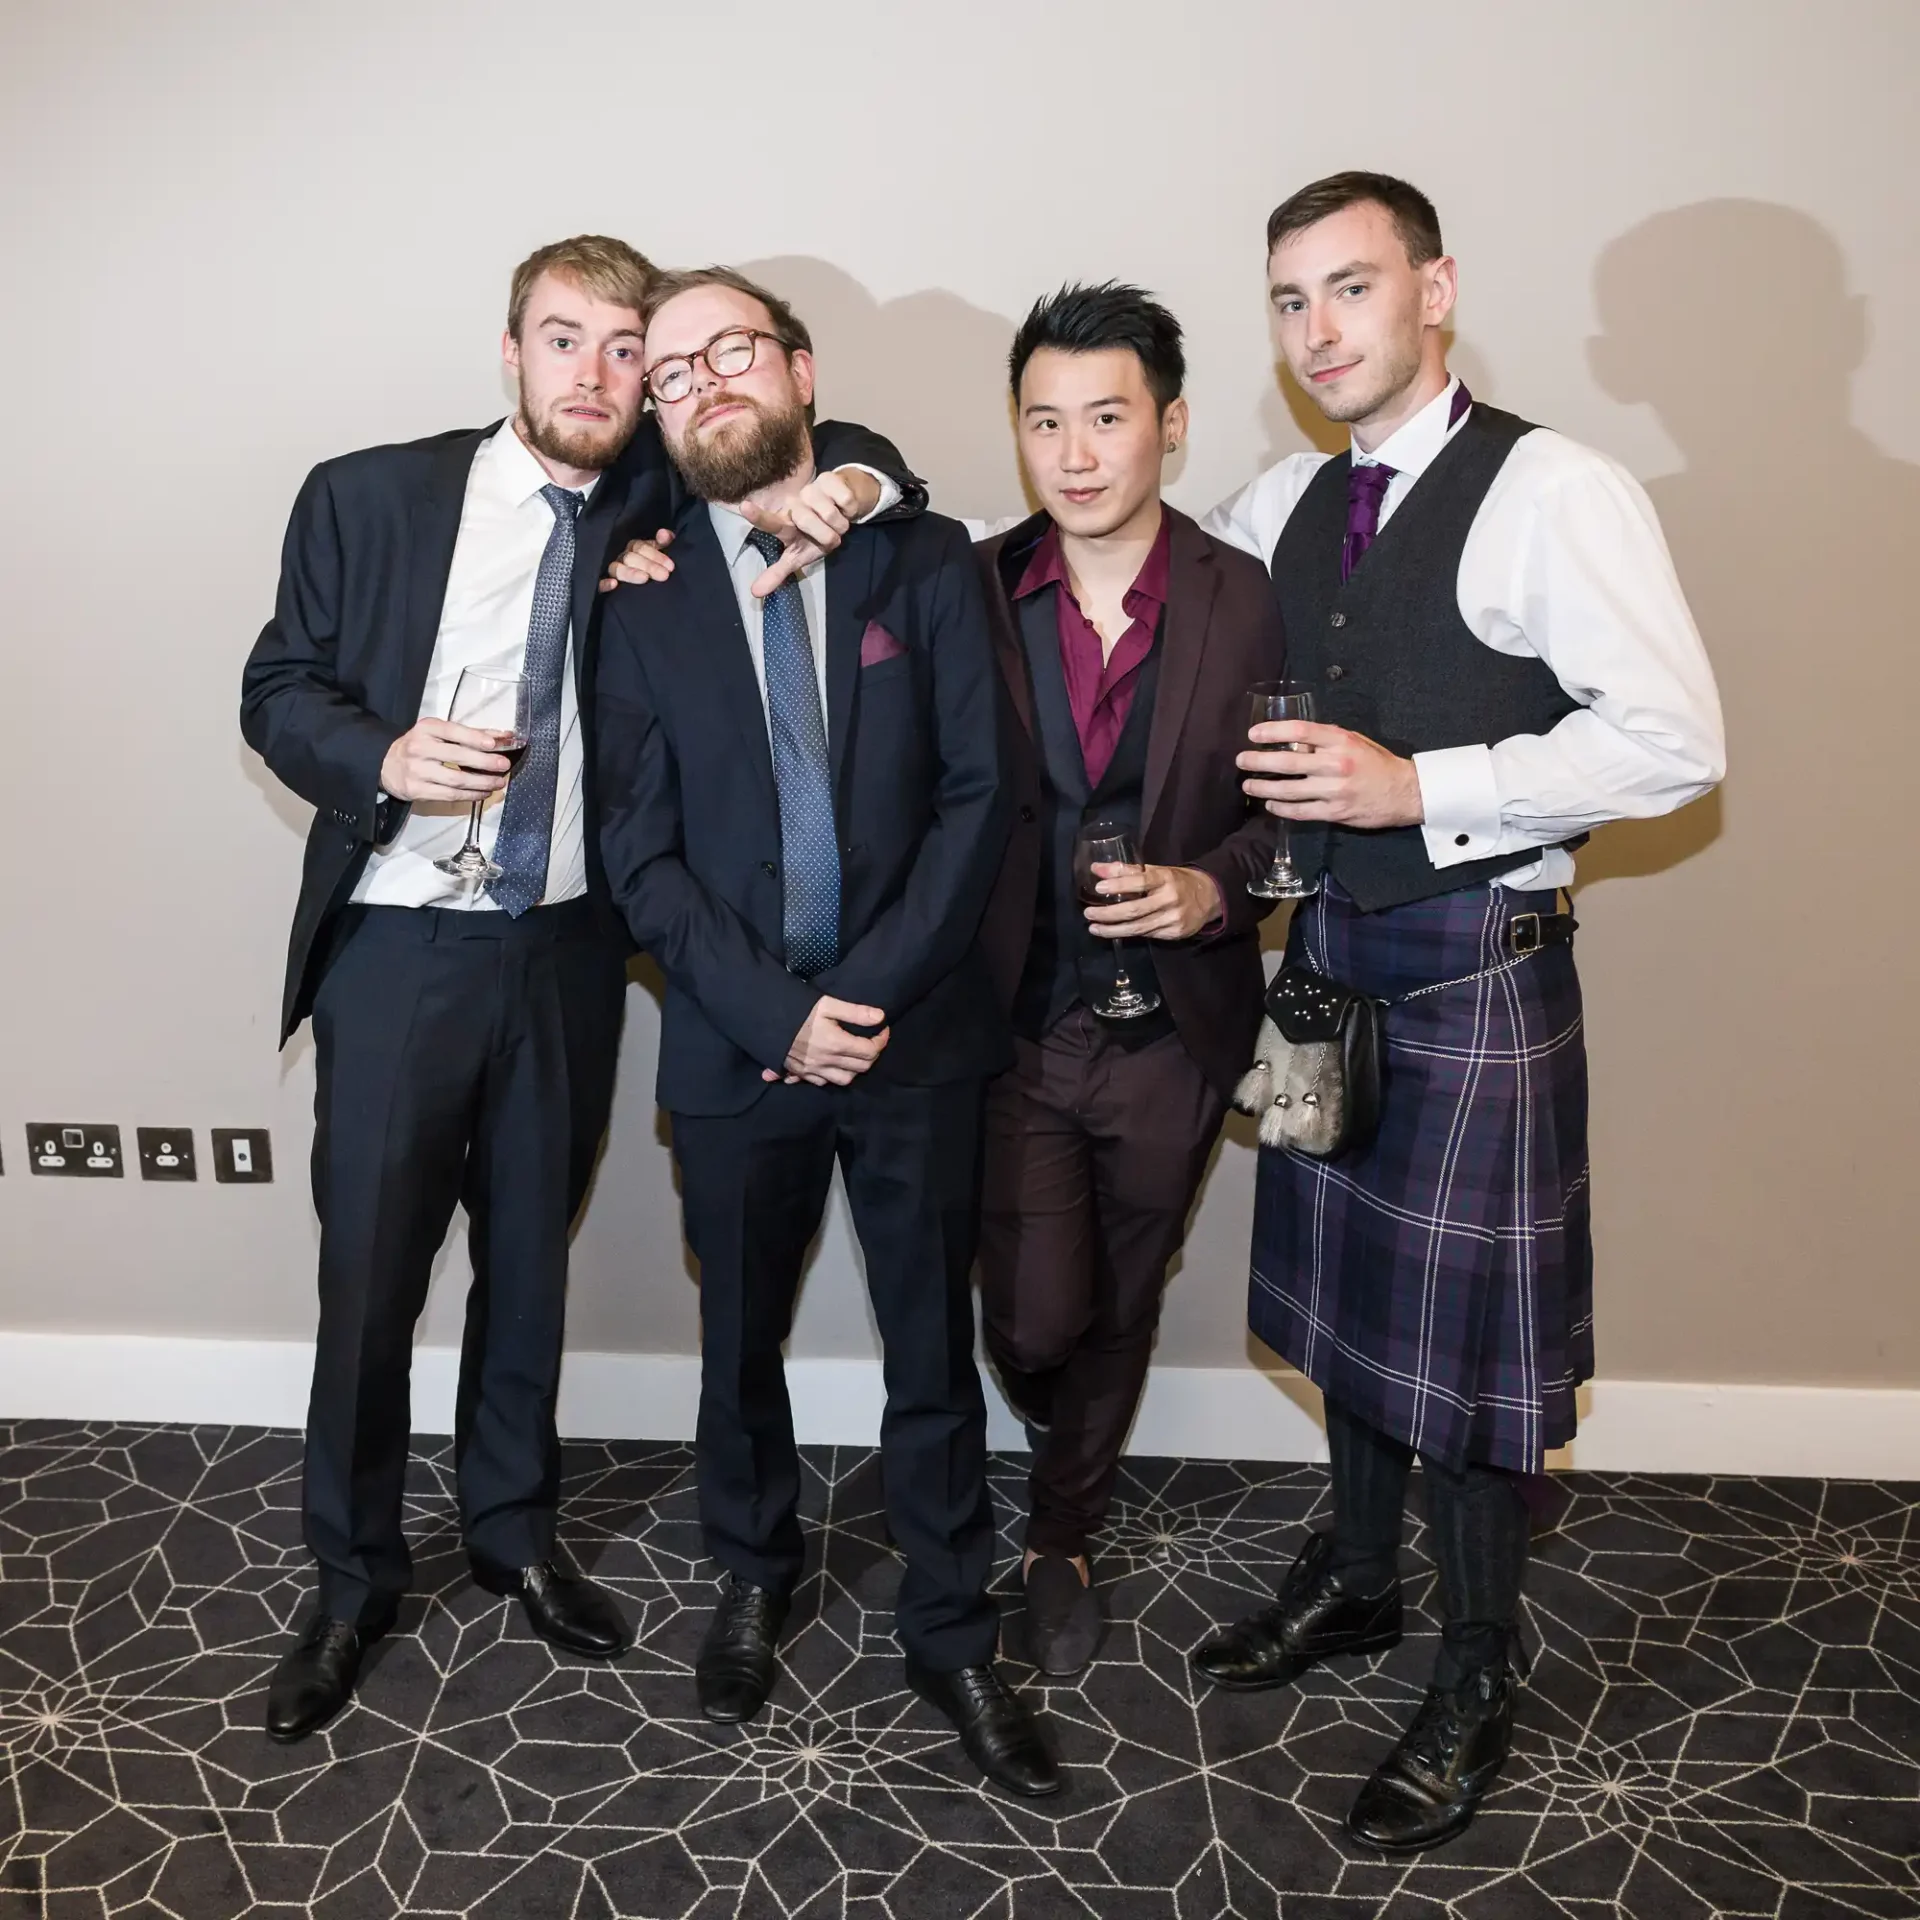 Four men in formal wear, one in a kilt, pose with drinks at an indoor event.